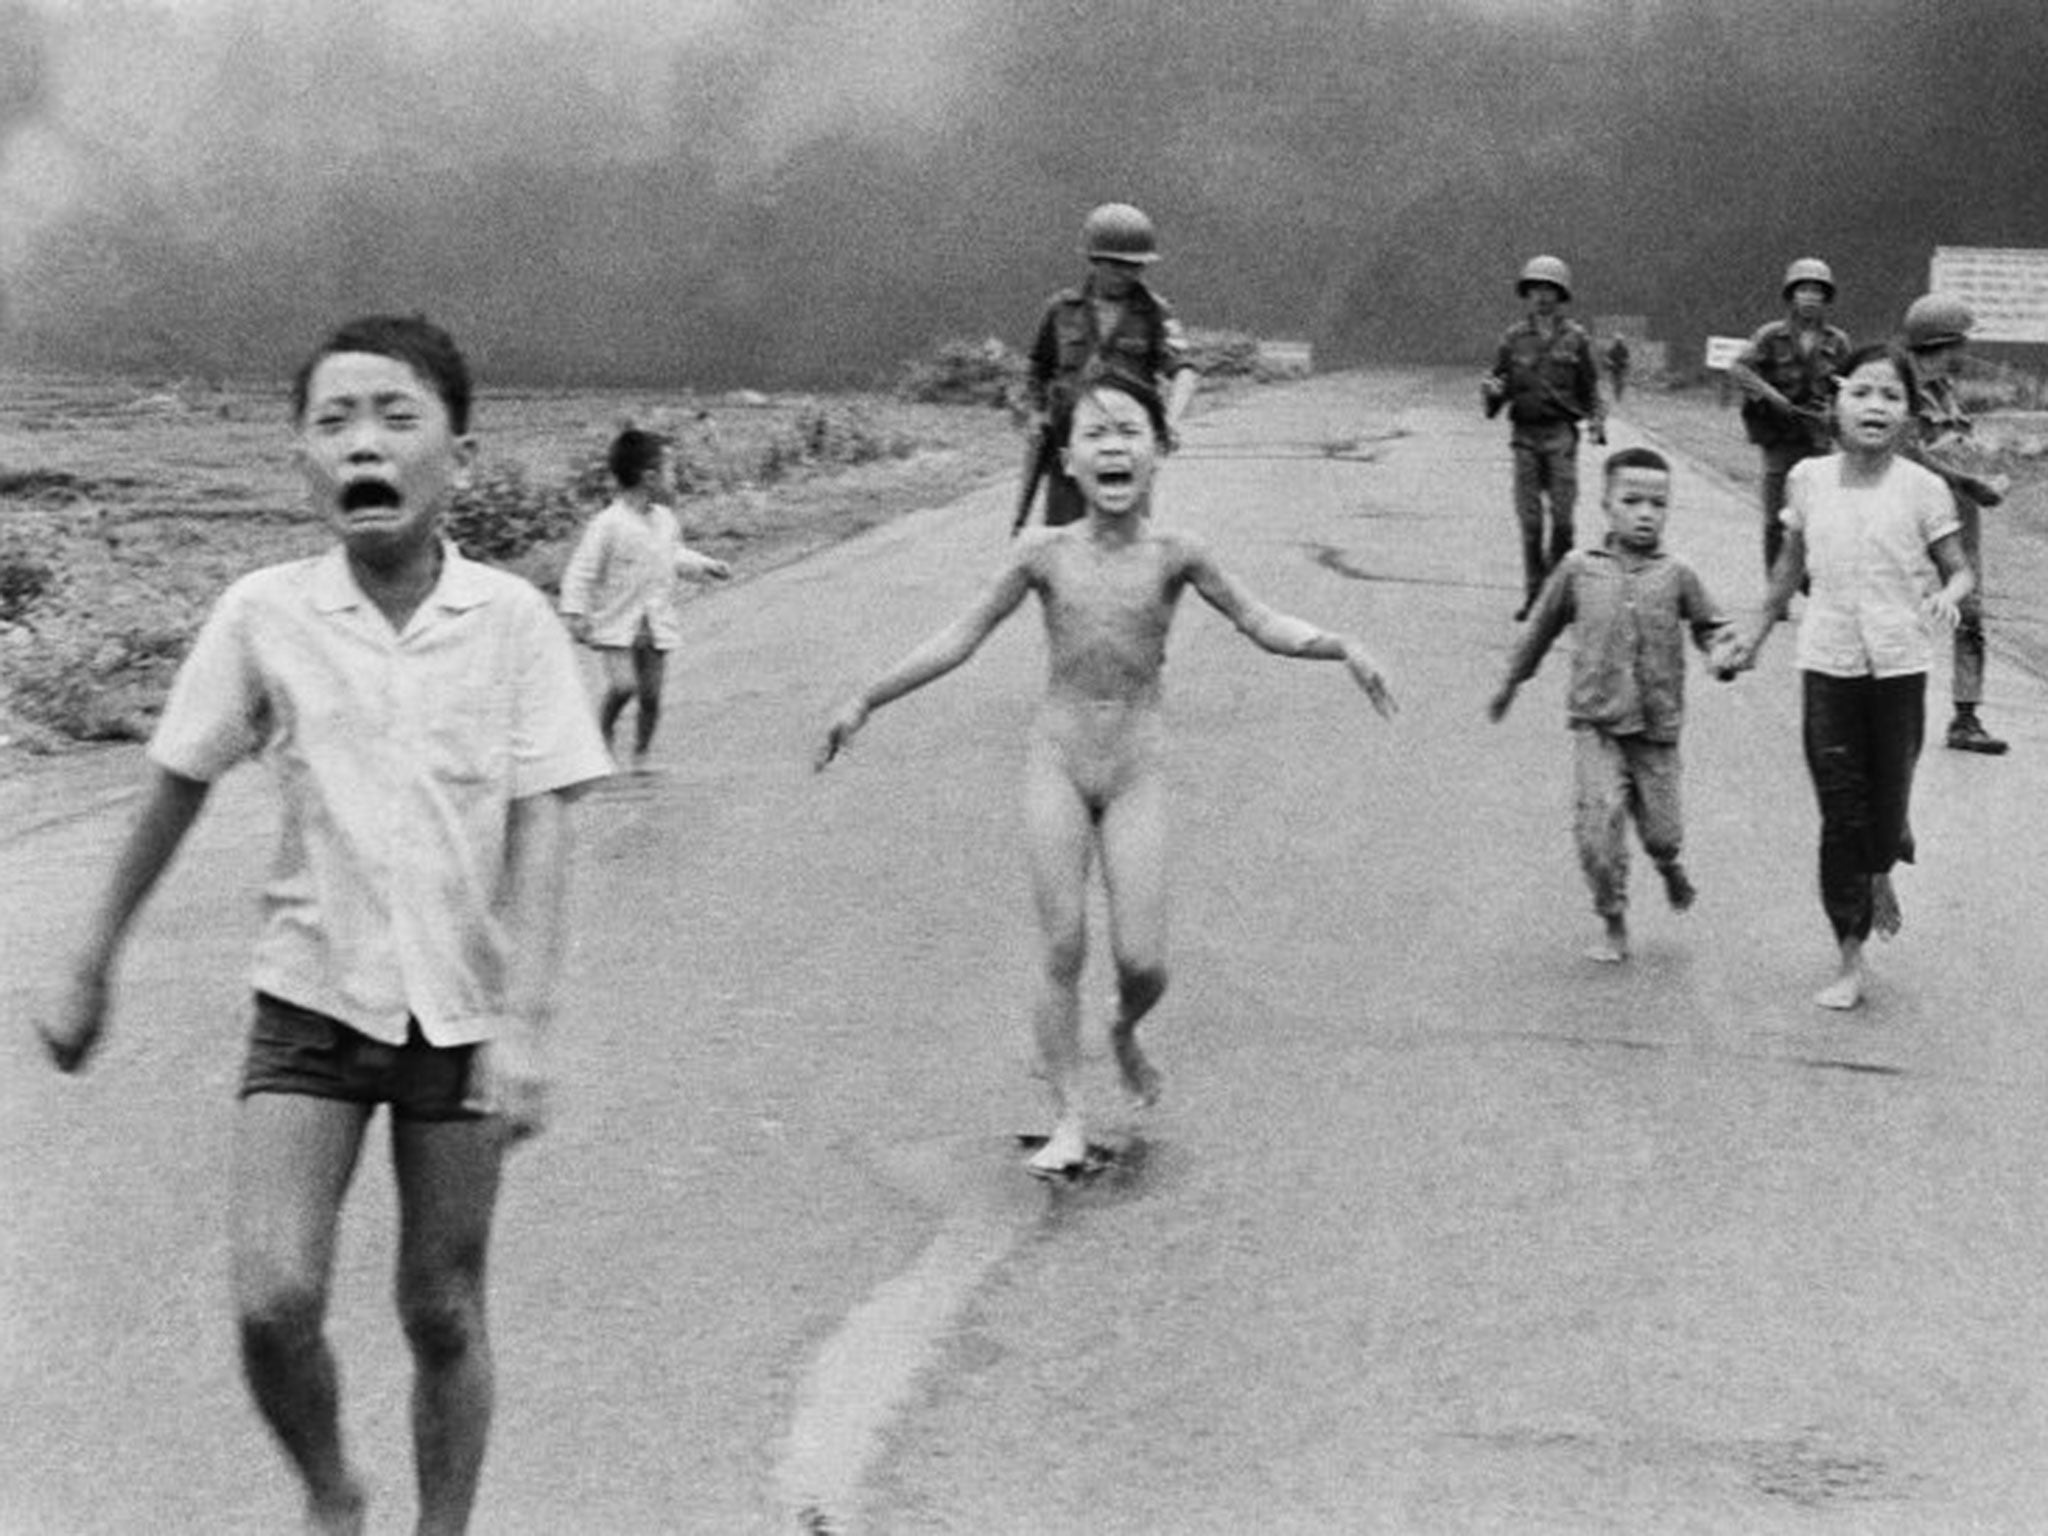 The iconic 1972 image from the Vietnam war